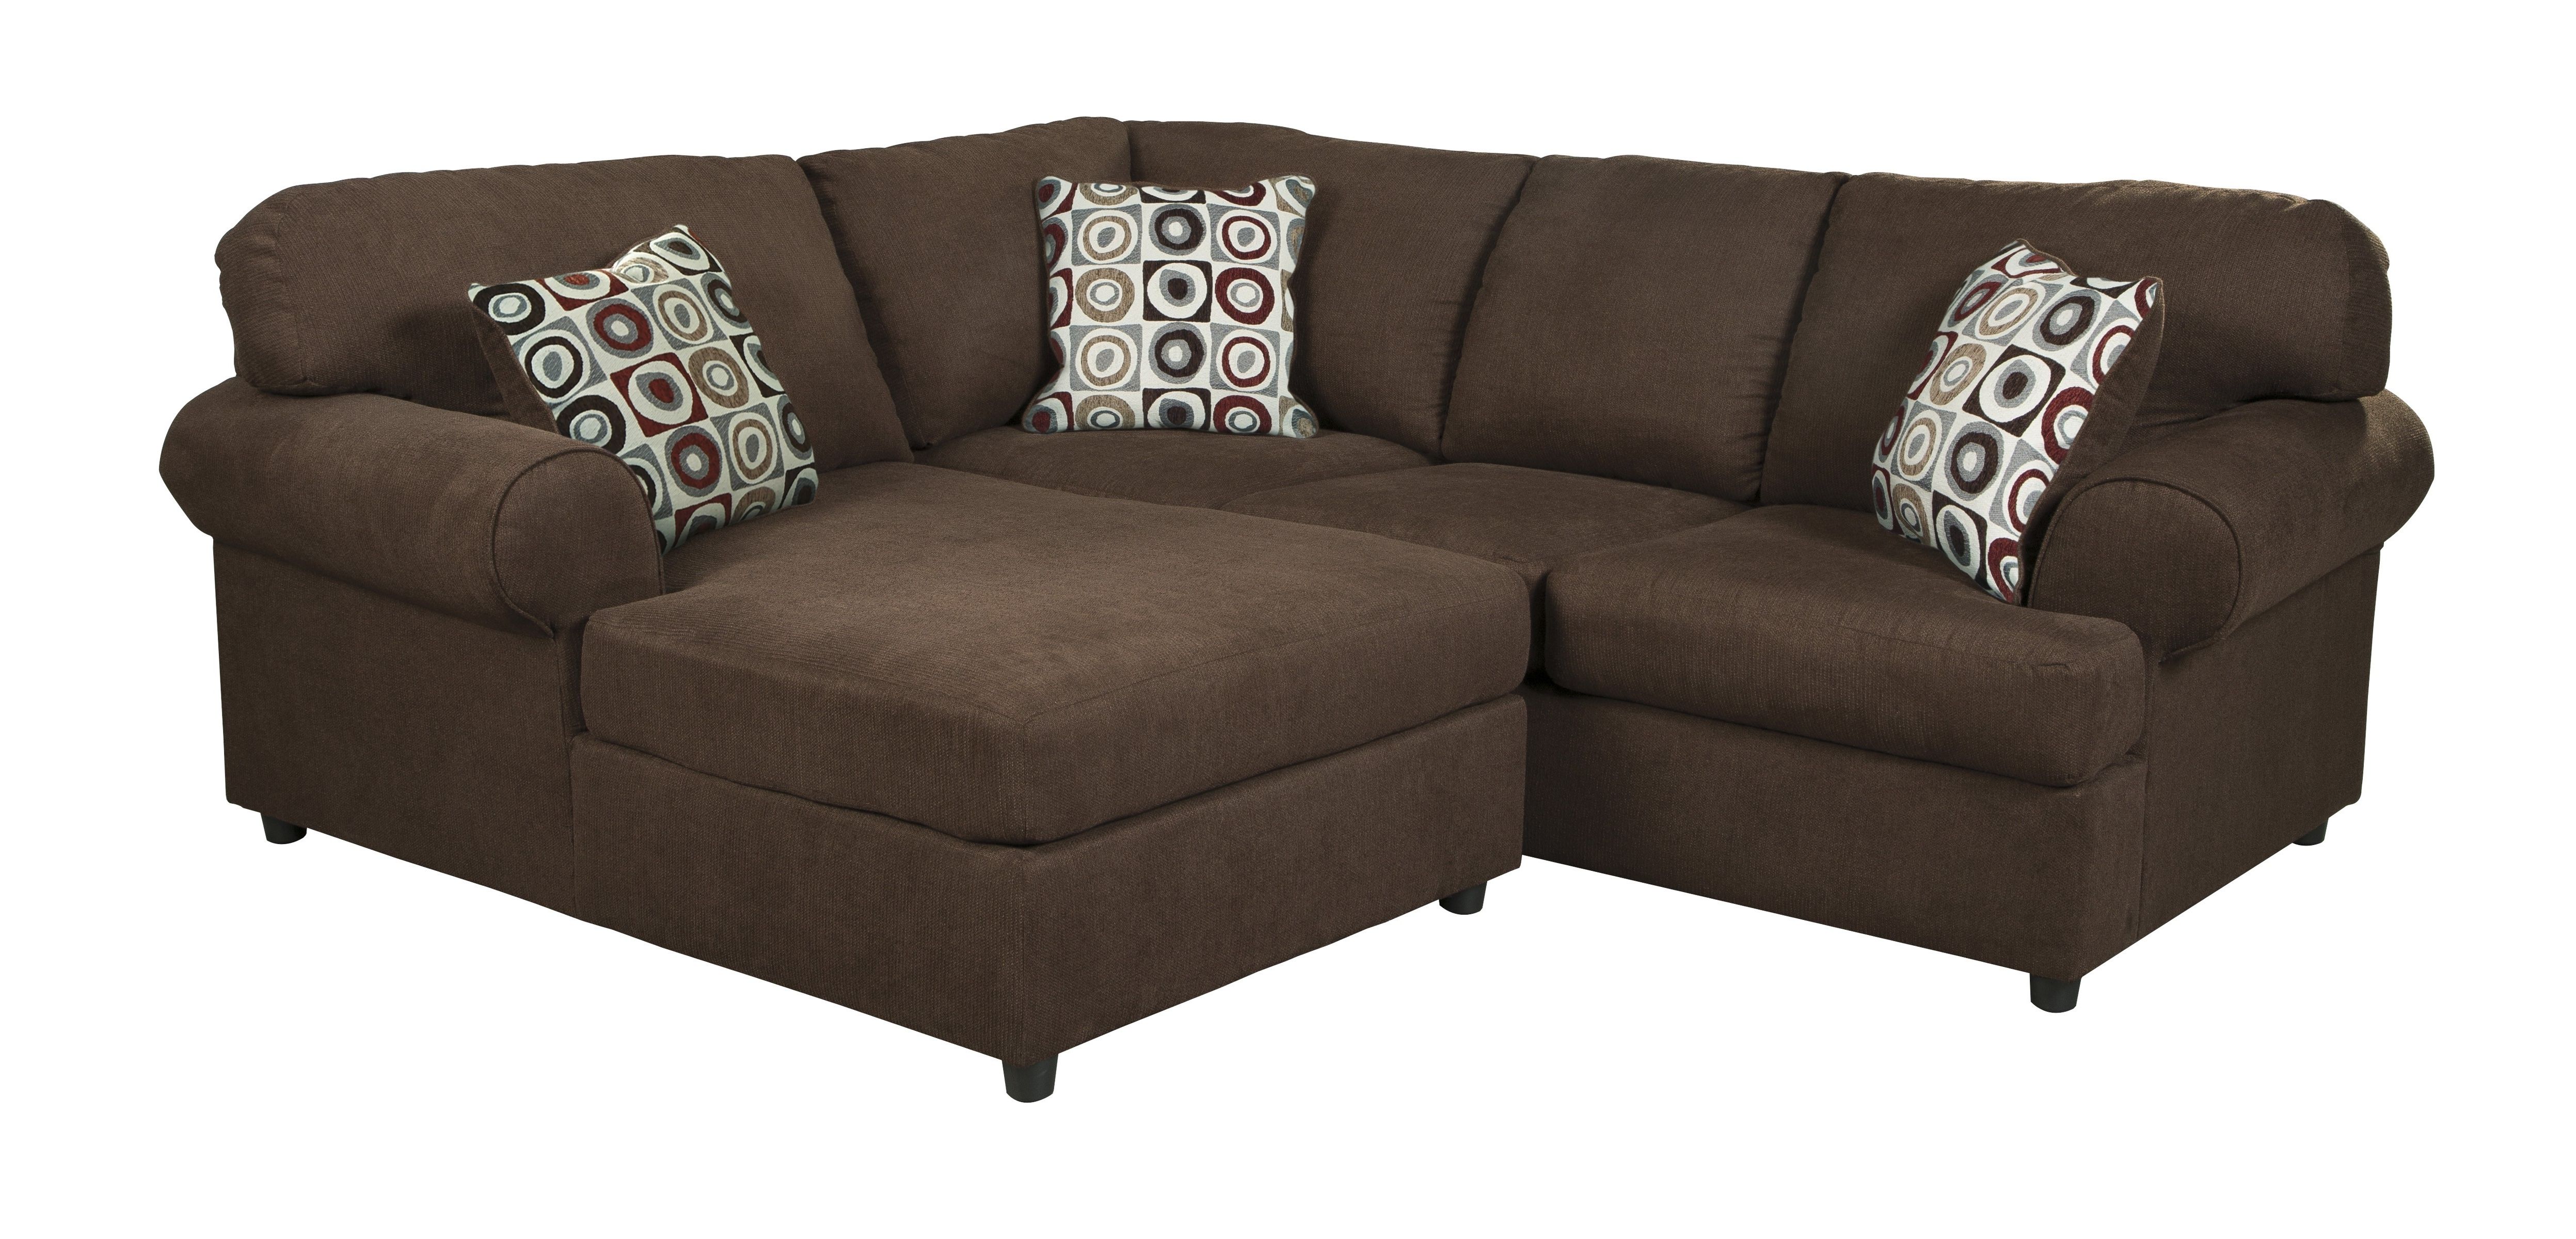 Buy Jayceon Java Sectional Raf Corner Chaise And Laf Sofa Throughout Latest Corner Chaises (View 3 of 15)